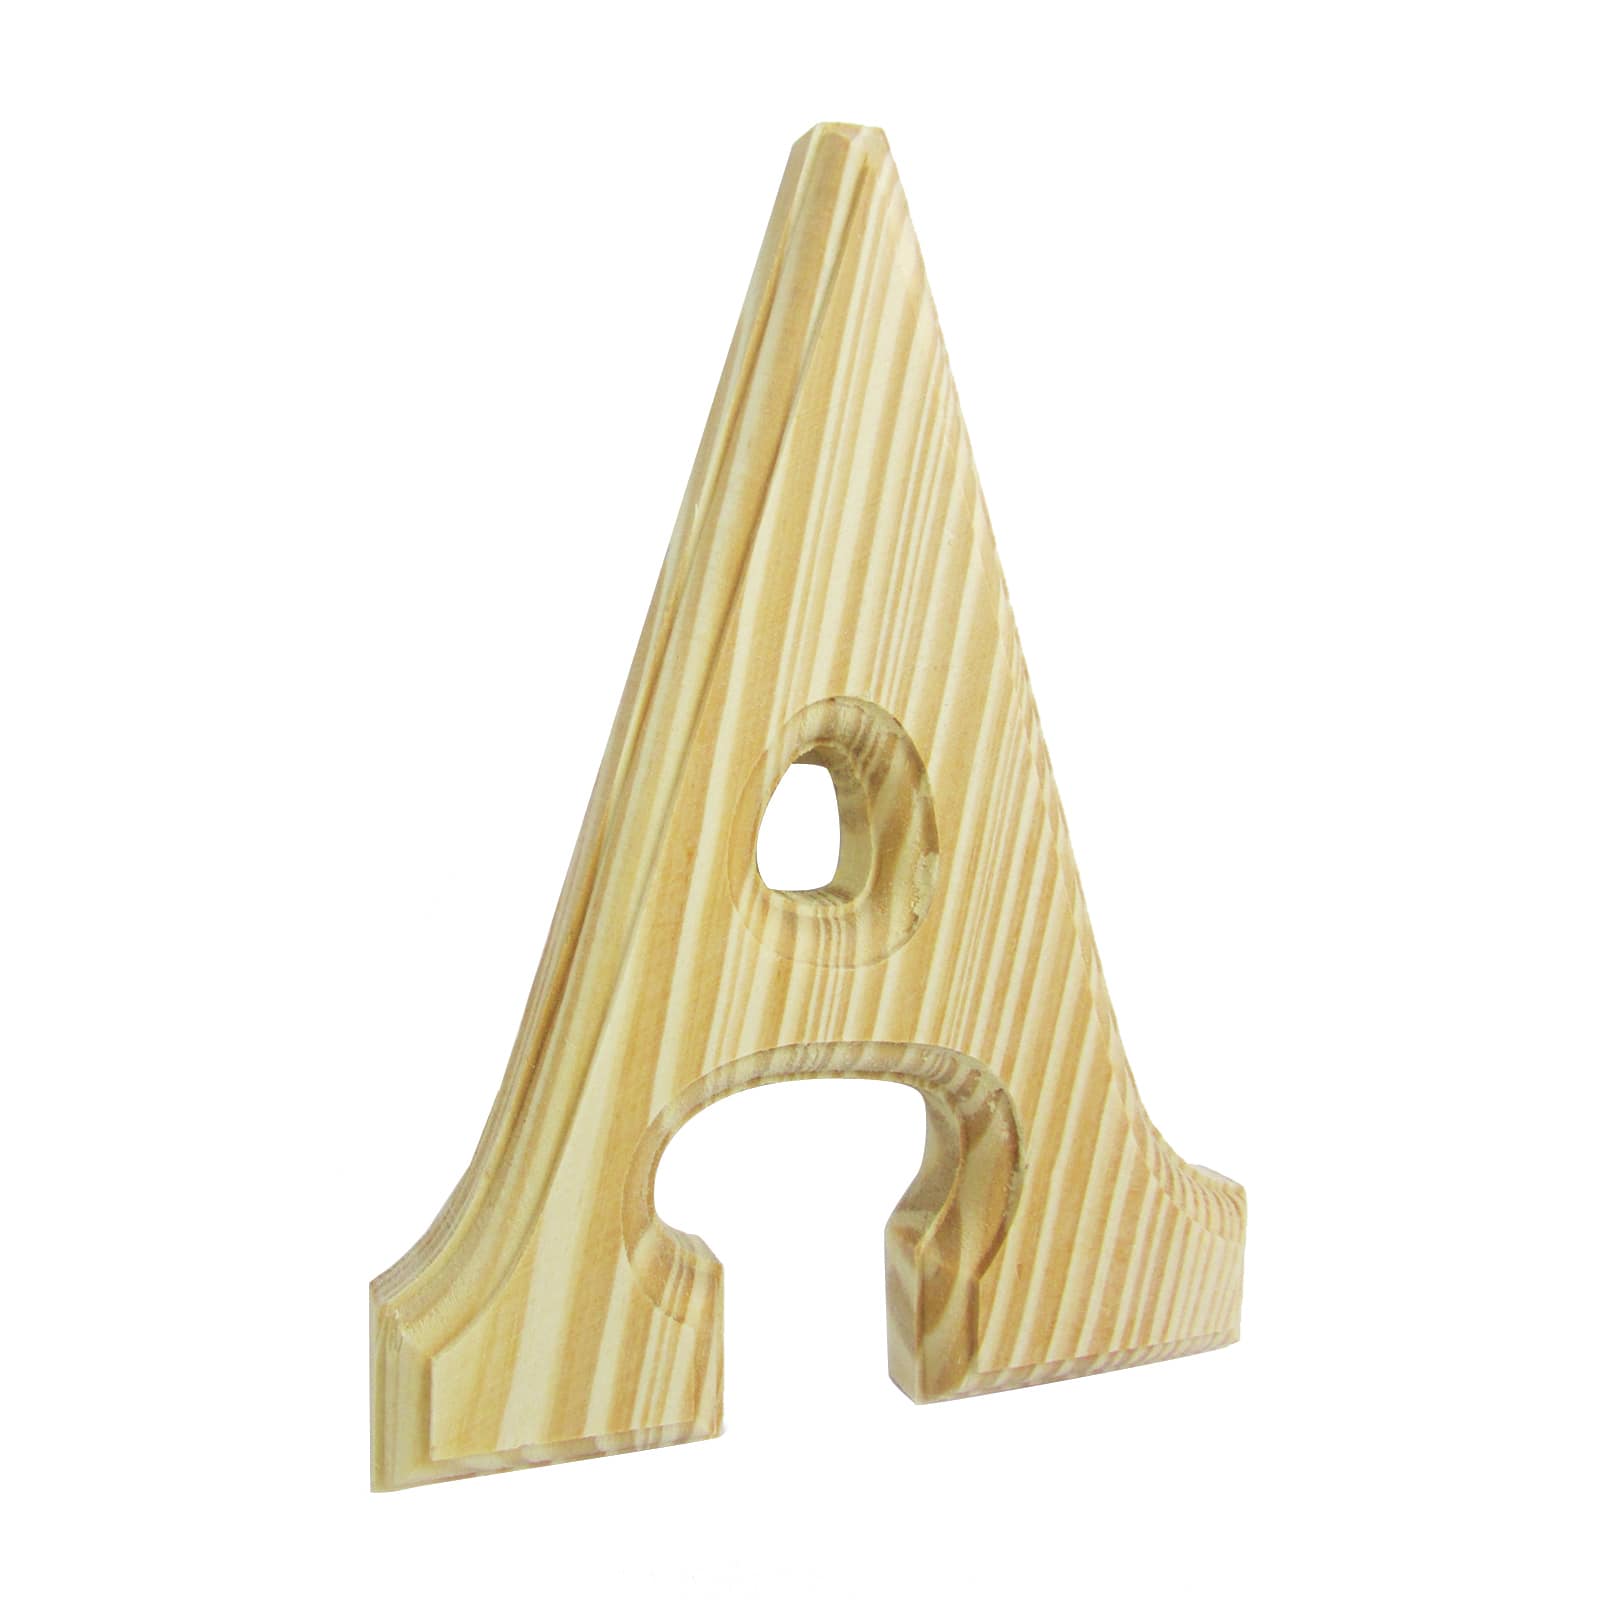 6 Inch White Wood Letters, Unfinished Wood Letters for Wall Decor